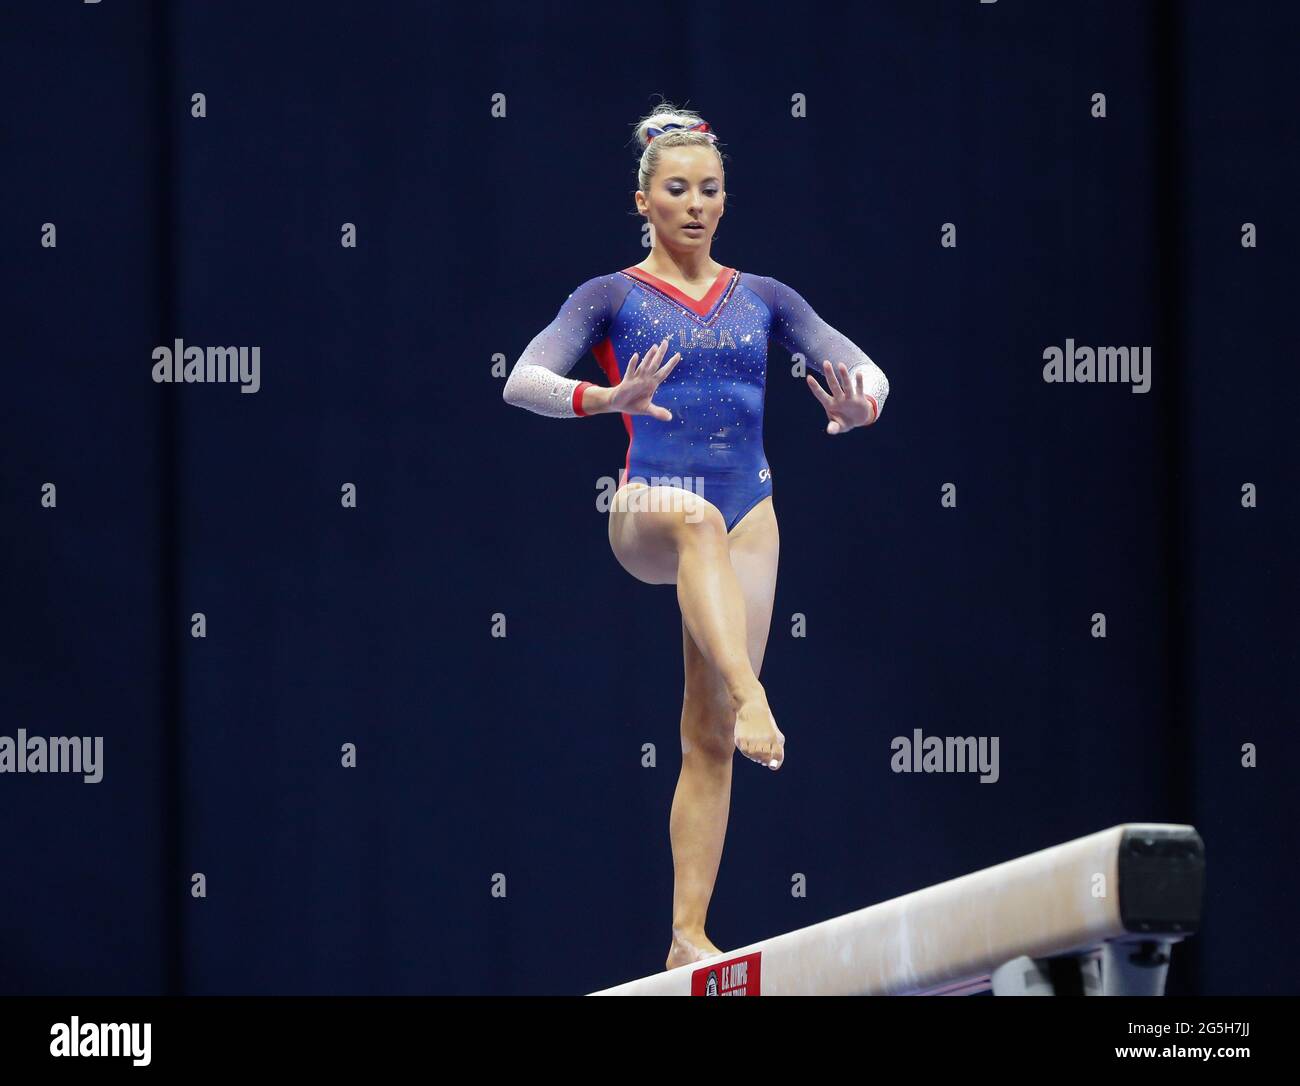 St Louis, USA. June 27, 2021: MyKayla Skinner performs on the balance beam during Day 2 of the 2021 U.S. Women's Gymnastics Olympic Team Trials at the Dome at America's Center in St. Louis, MO. Kyle Okita/CSM Credit: Cal Sport Media/Alamy Live News Stock Photo